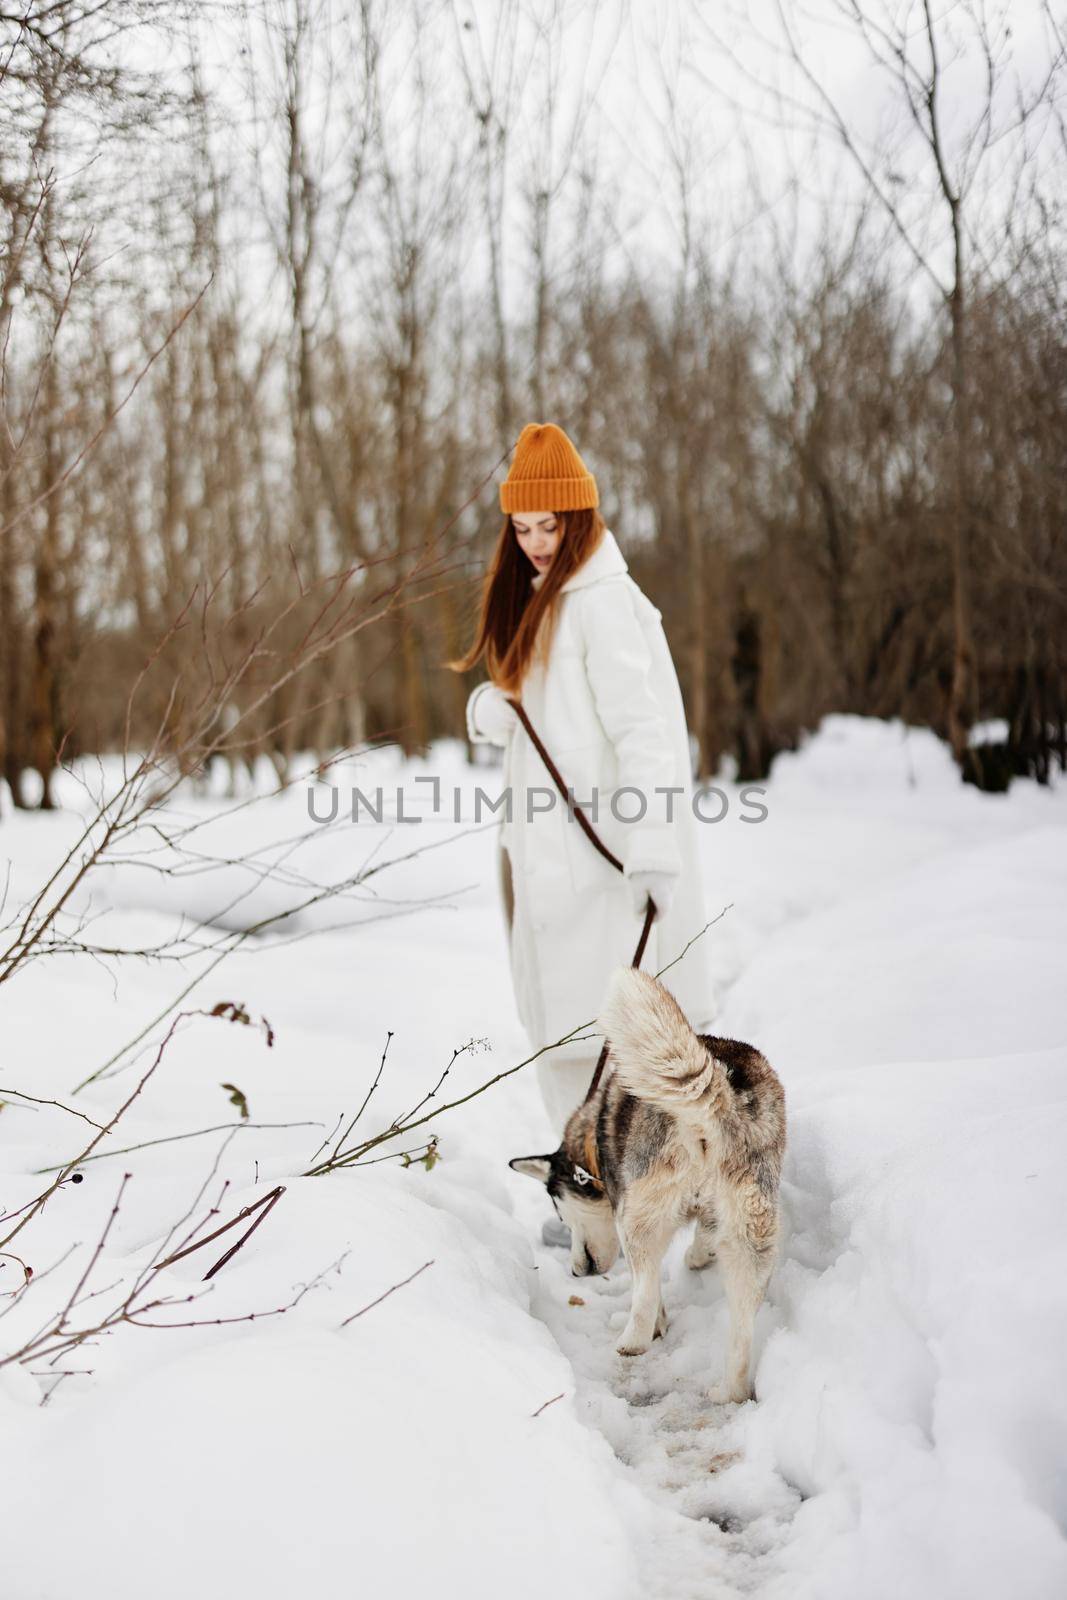 young woman in the snow playing with a dog outdoors friendship winter holidays by SHOTPRIME